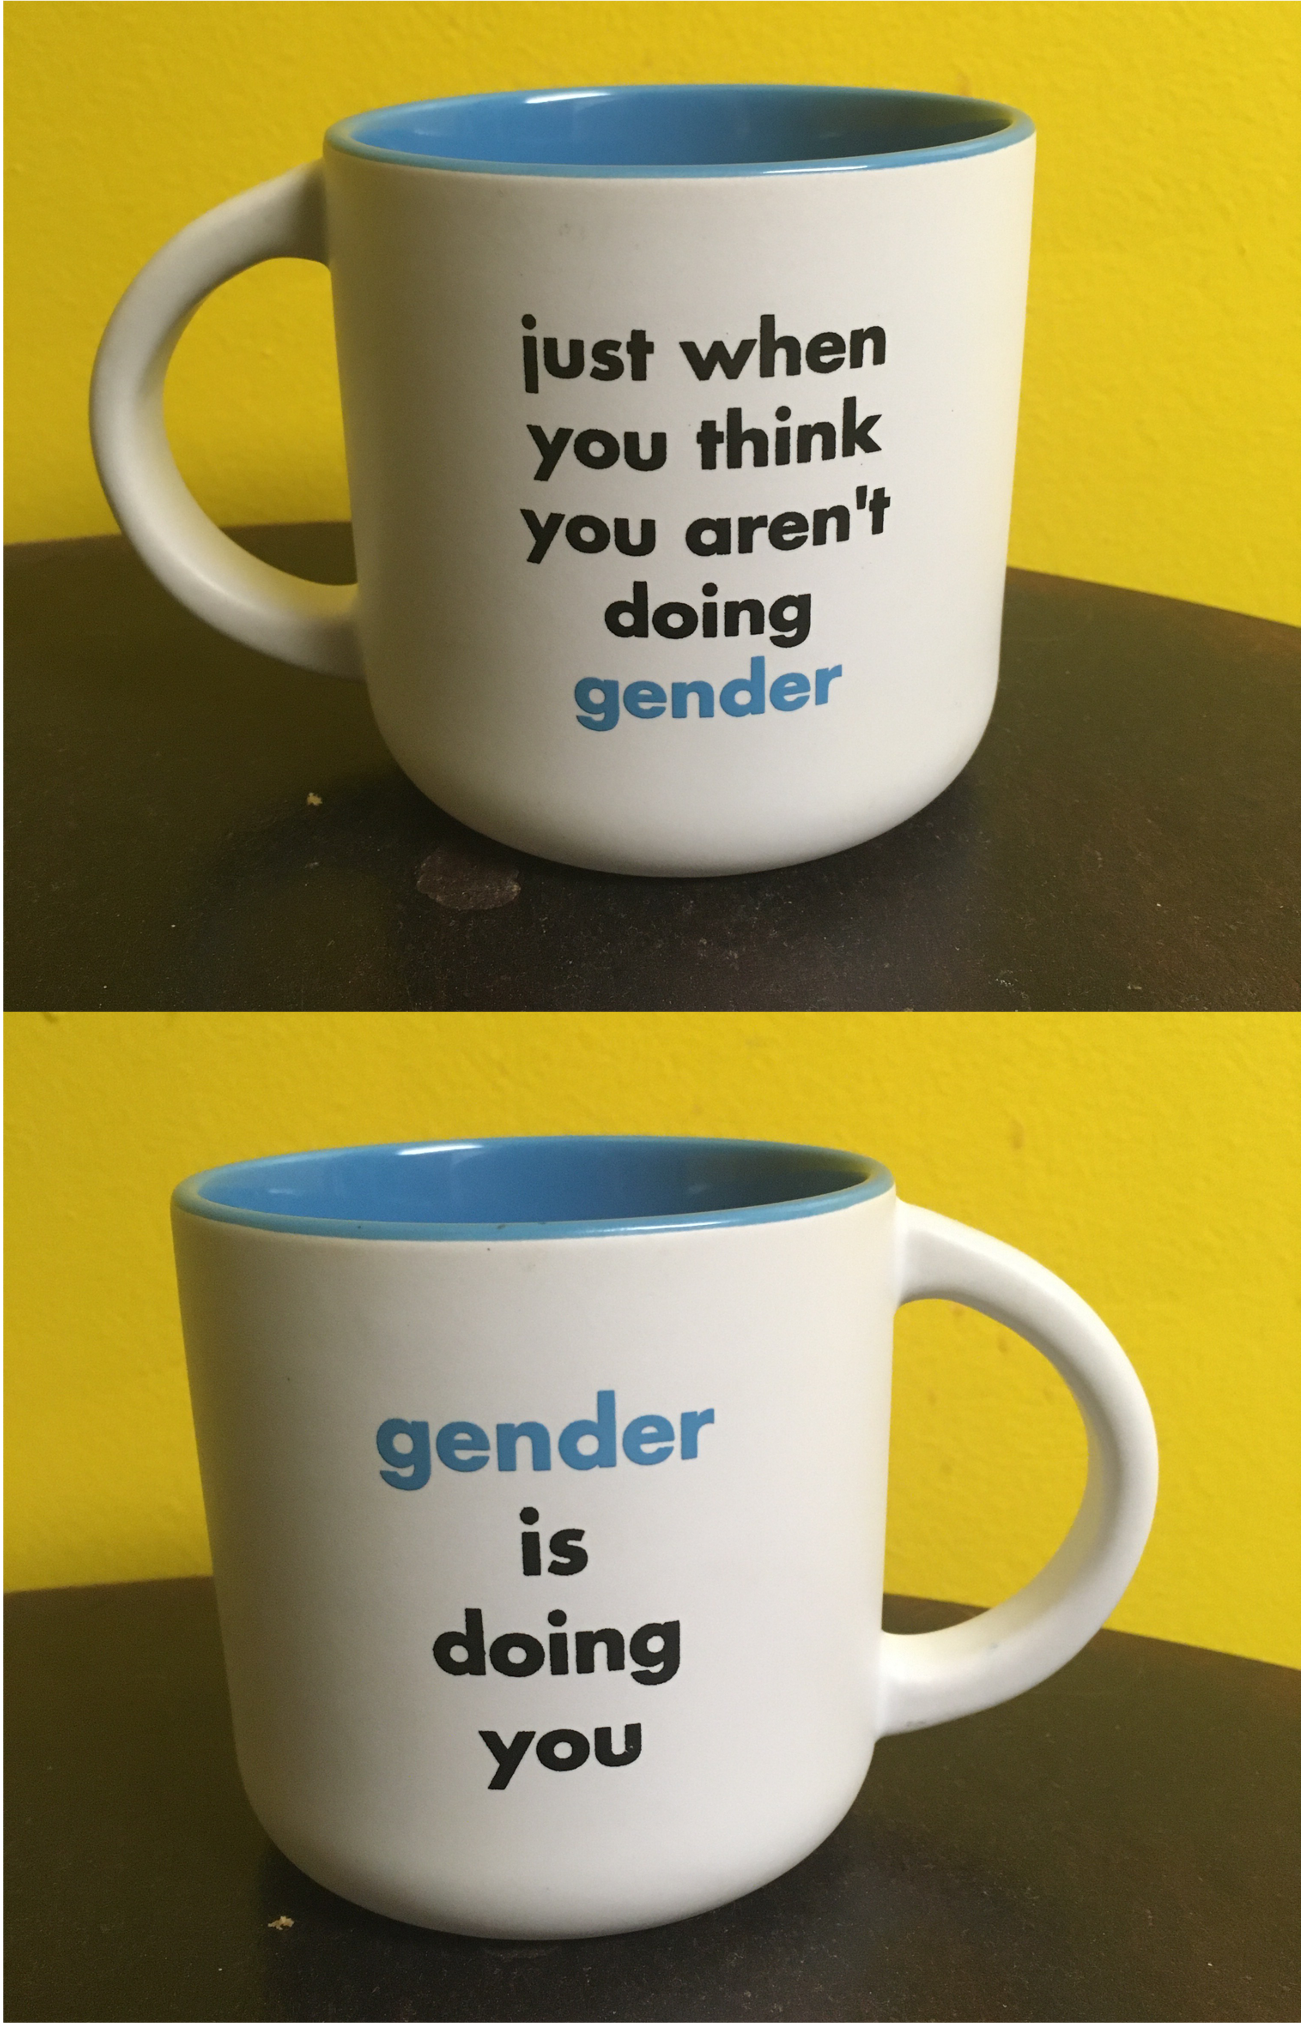 Two images of a white mug on a brown table with a yellow wall behind it. The front of the mug reads "just when you think you aren't doing gender"; the back (in the second photo) reads "gender is doing you."